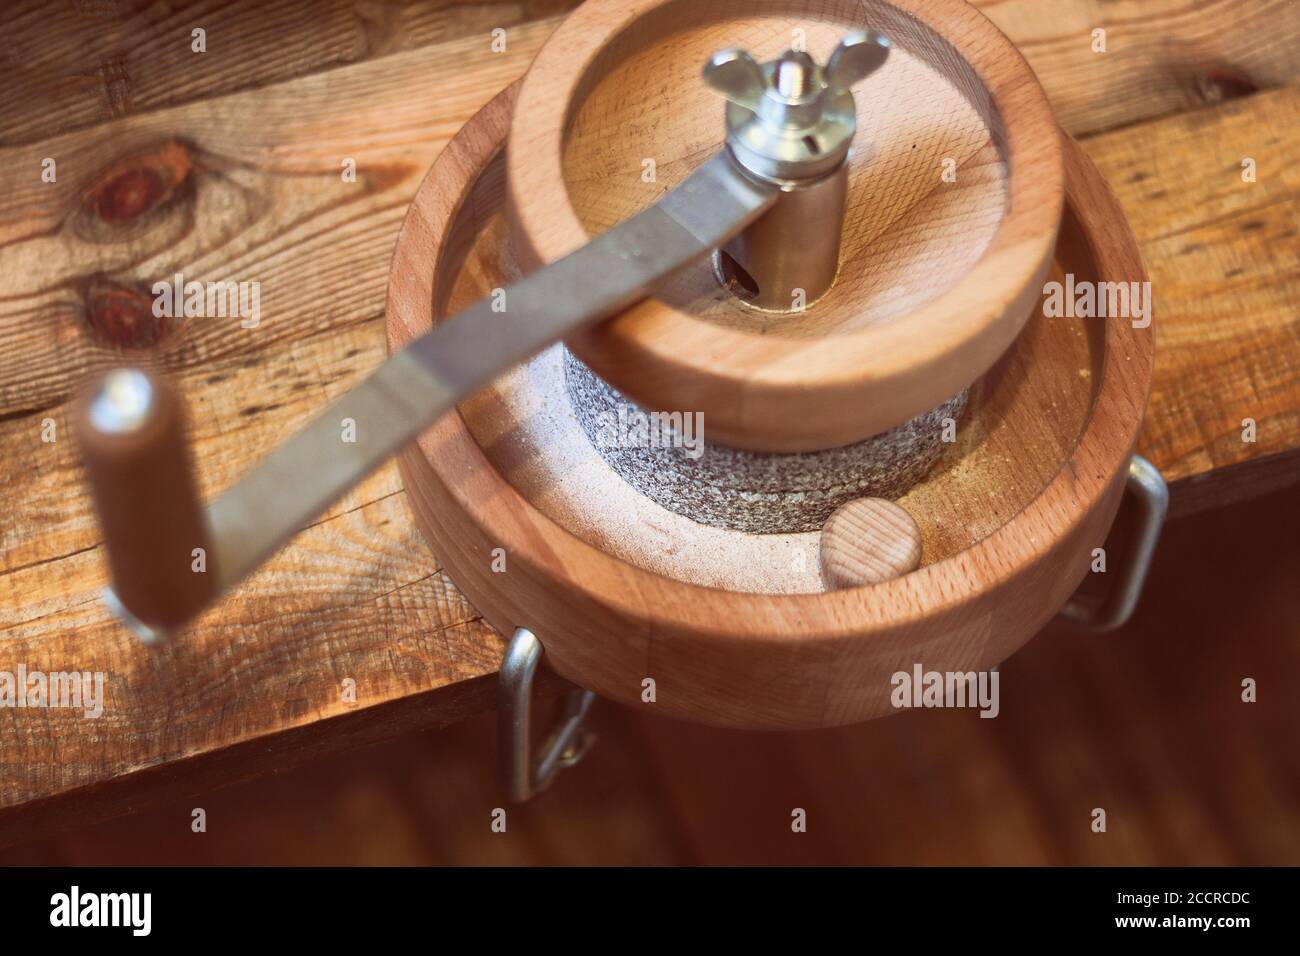 grain grinder - Manual Grain Mill for Hand Grinding, on a wooden table Stock Photo